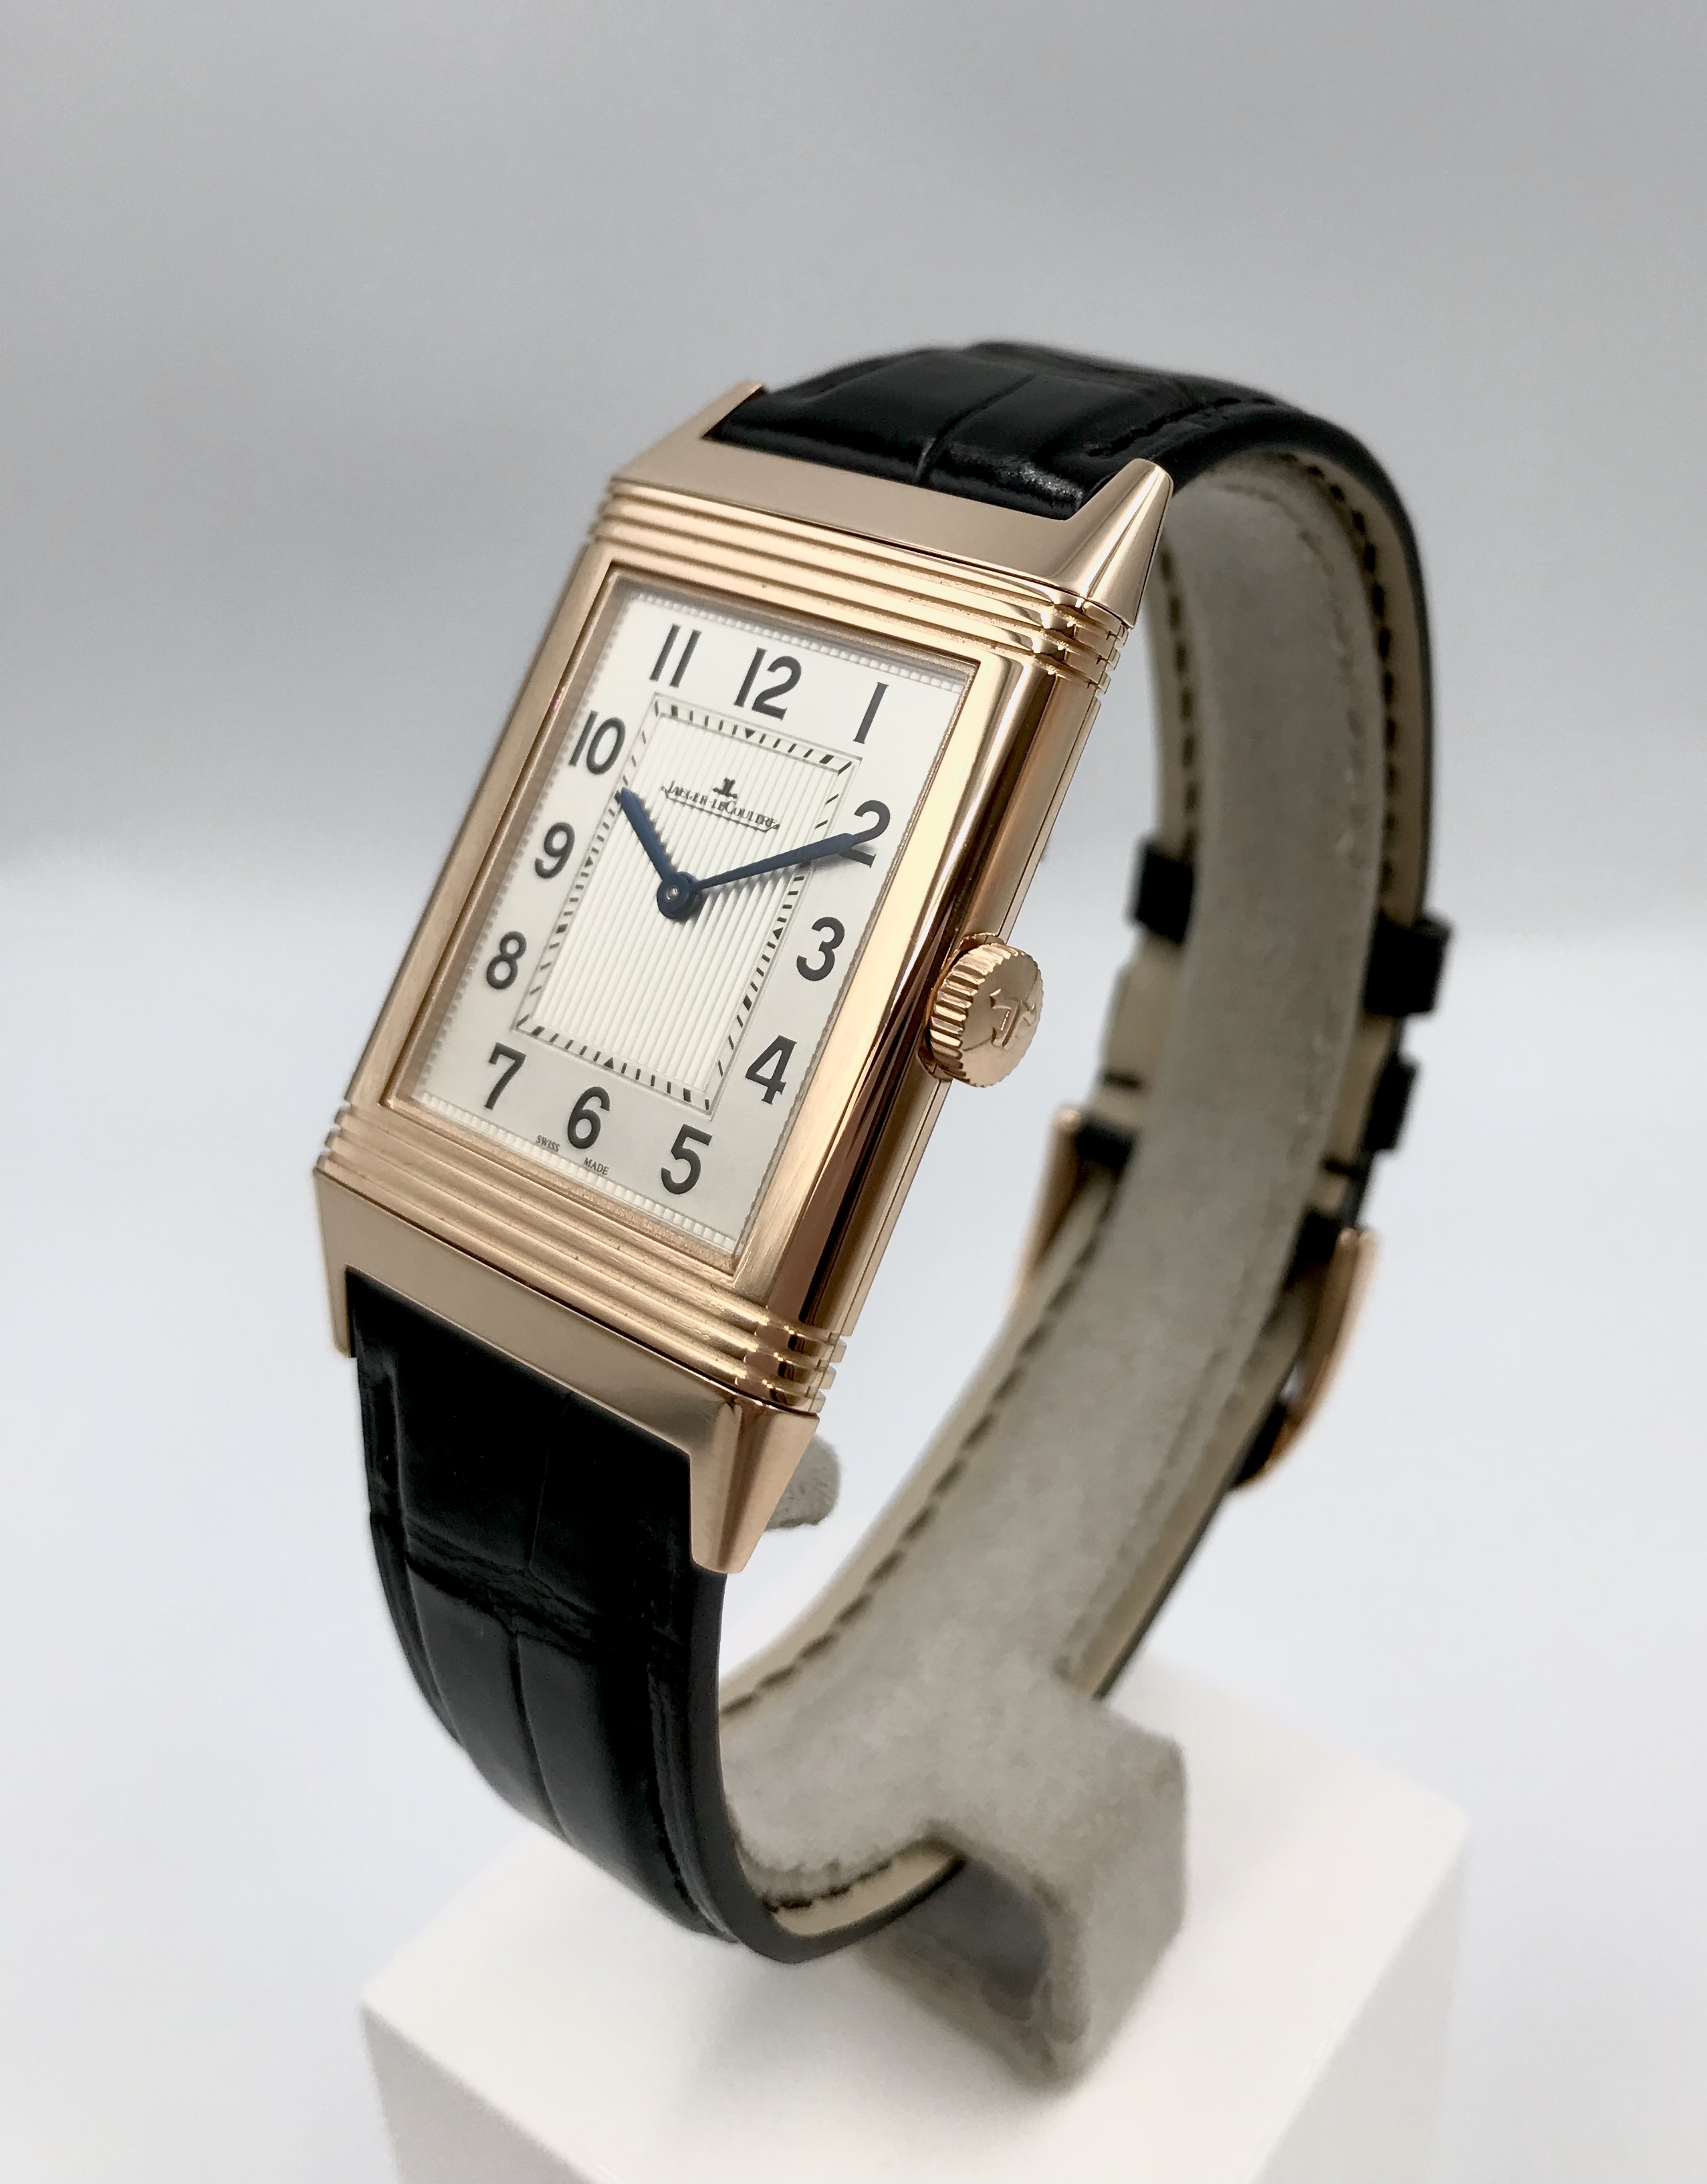 Jeager-LeCulture Reverso Ultra Thin